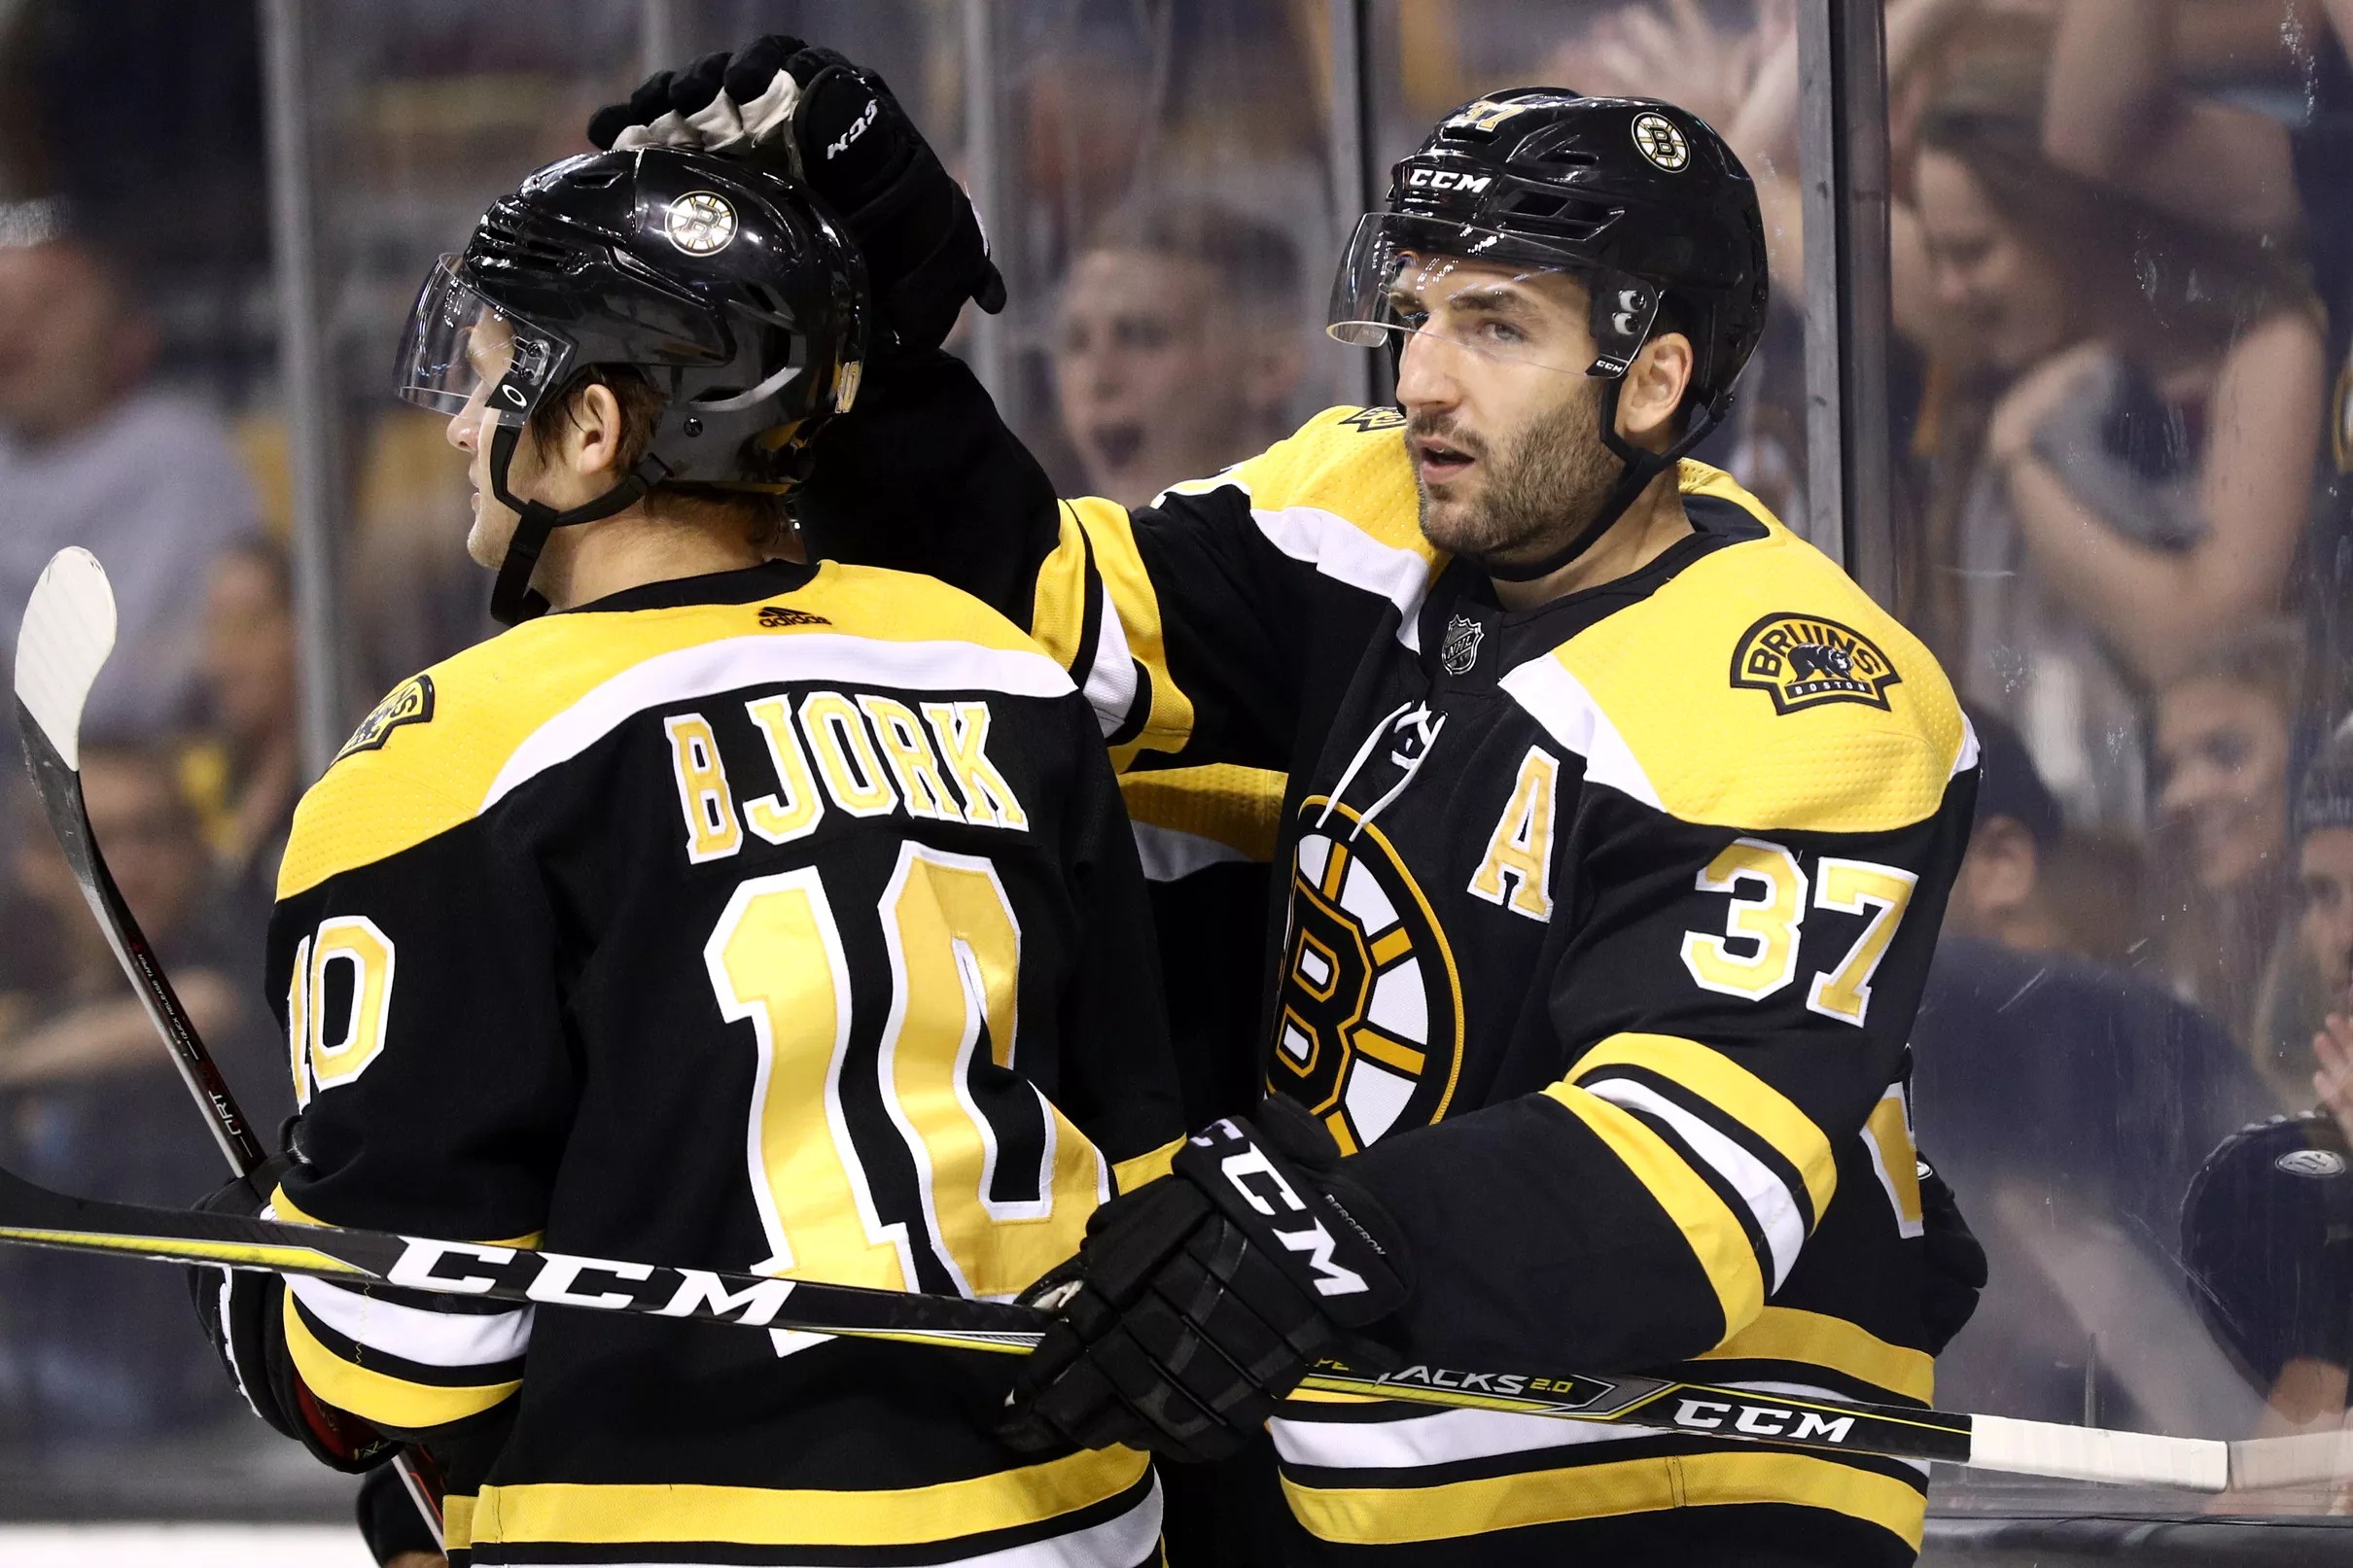 Take a look at the Bruins’ opening night roster